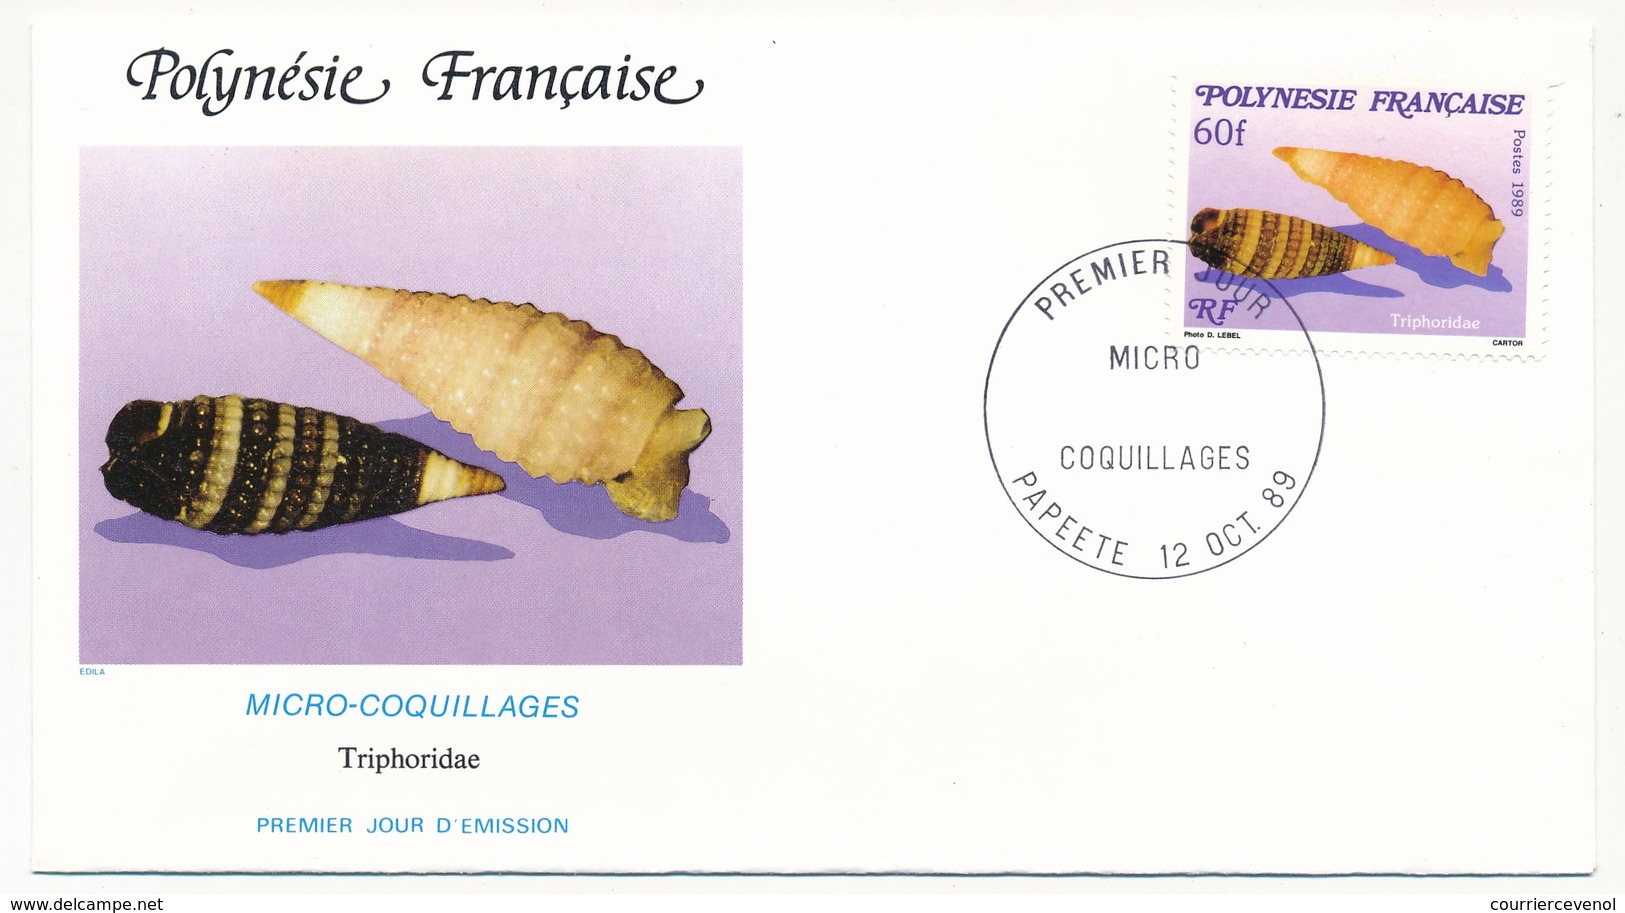 POLYNESIE FRANCAISE - 3 FDC - Micro Coquillages - 12 Décembre 1989 - Papeete - FDC